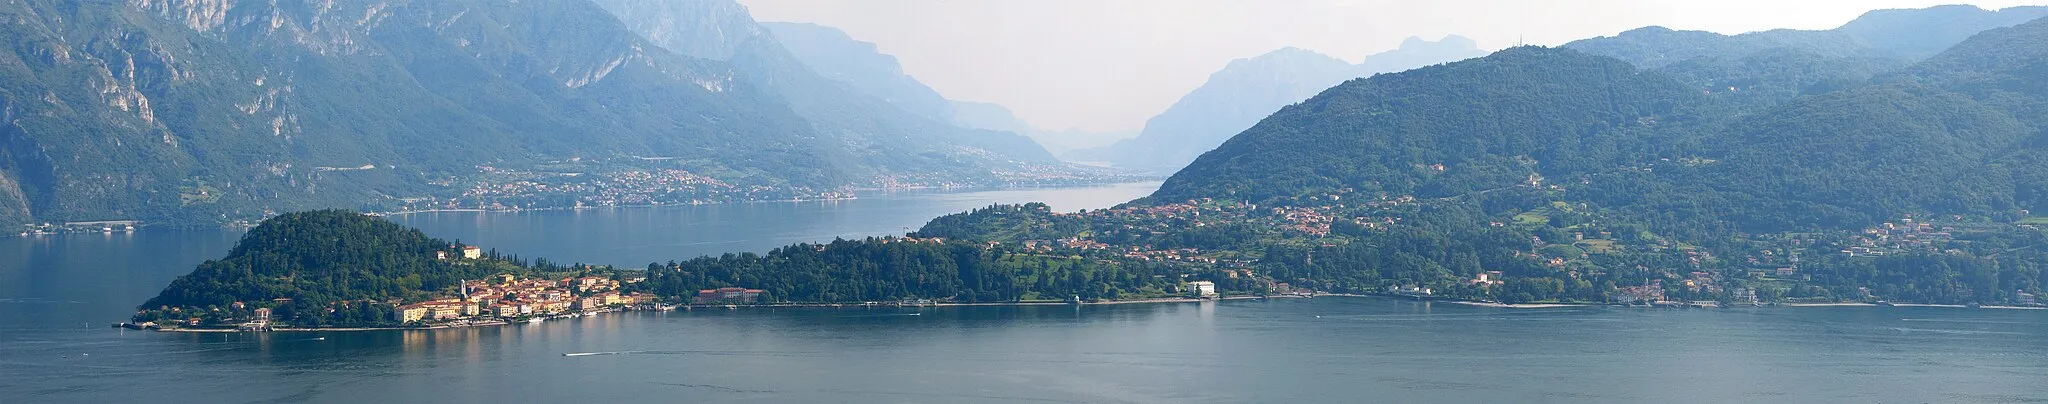 Photo showing: View of Bellagio Promontory, Lake Como, Italy, from San Martino Church, Griante